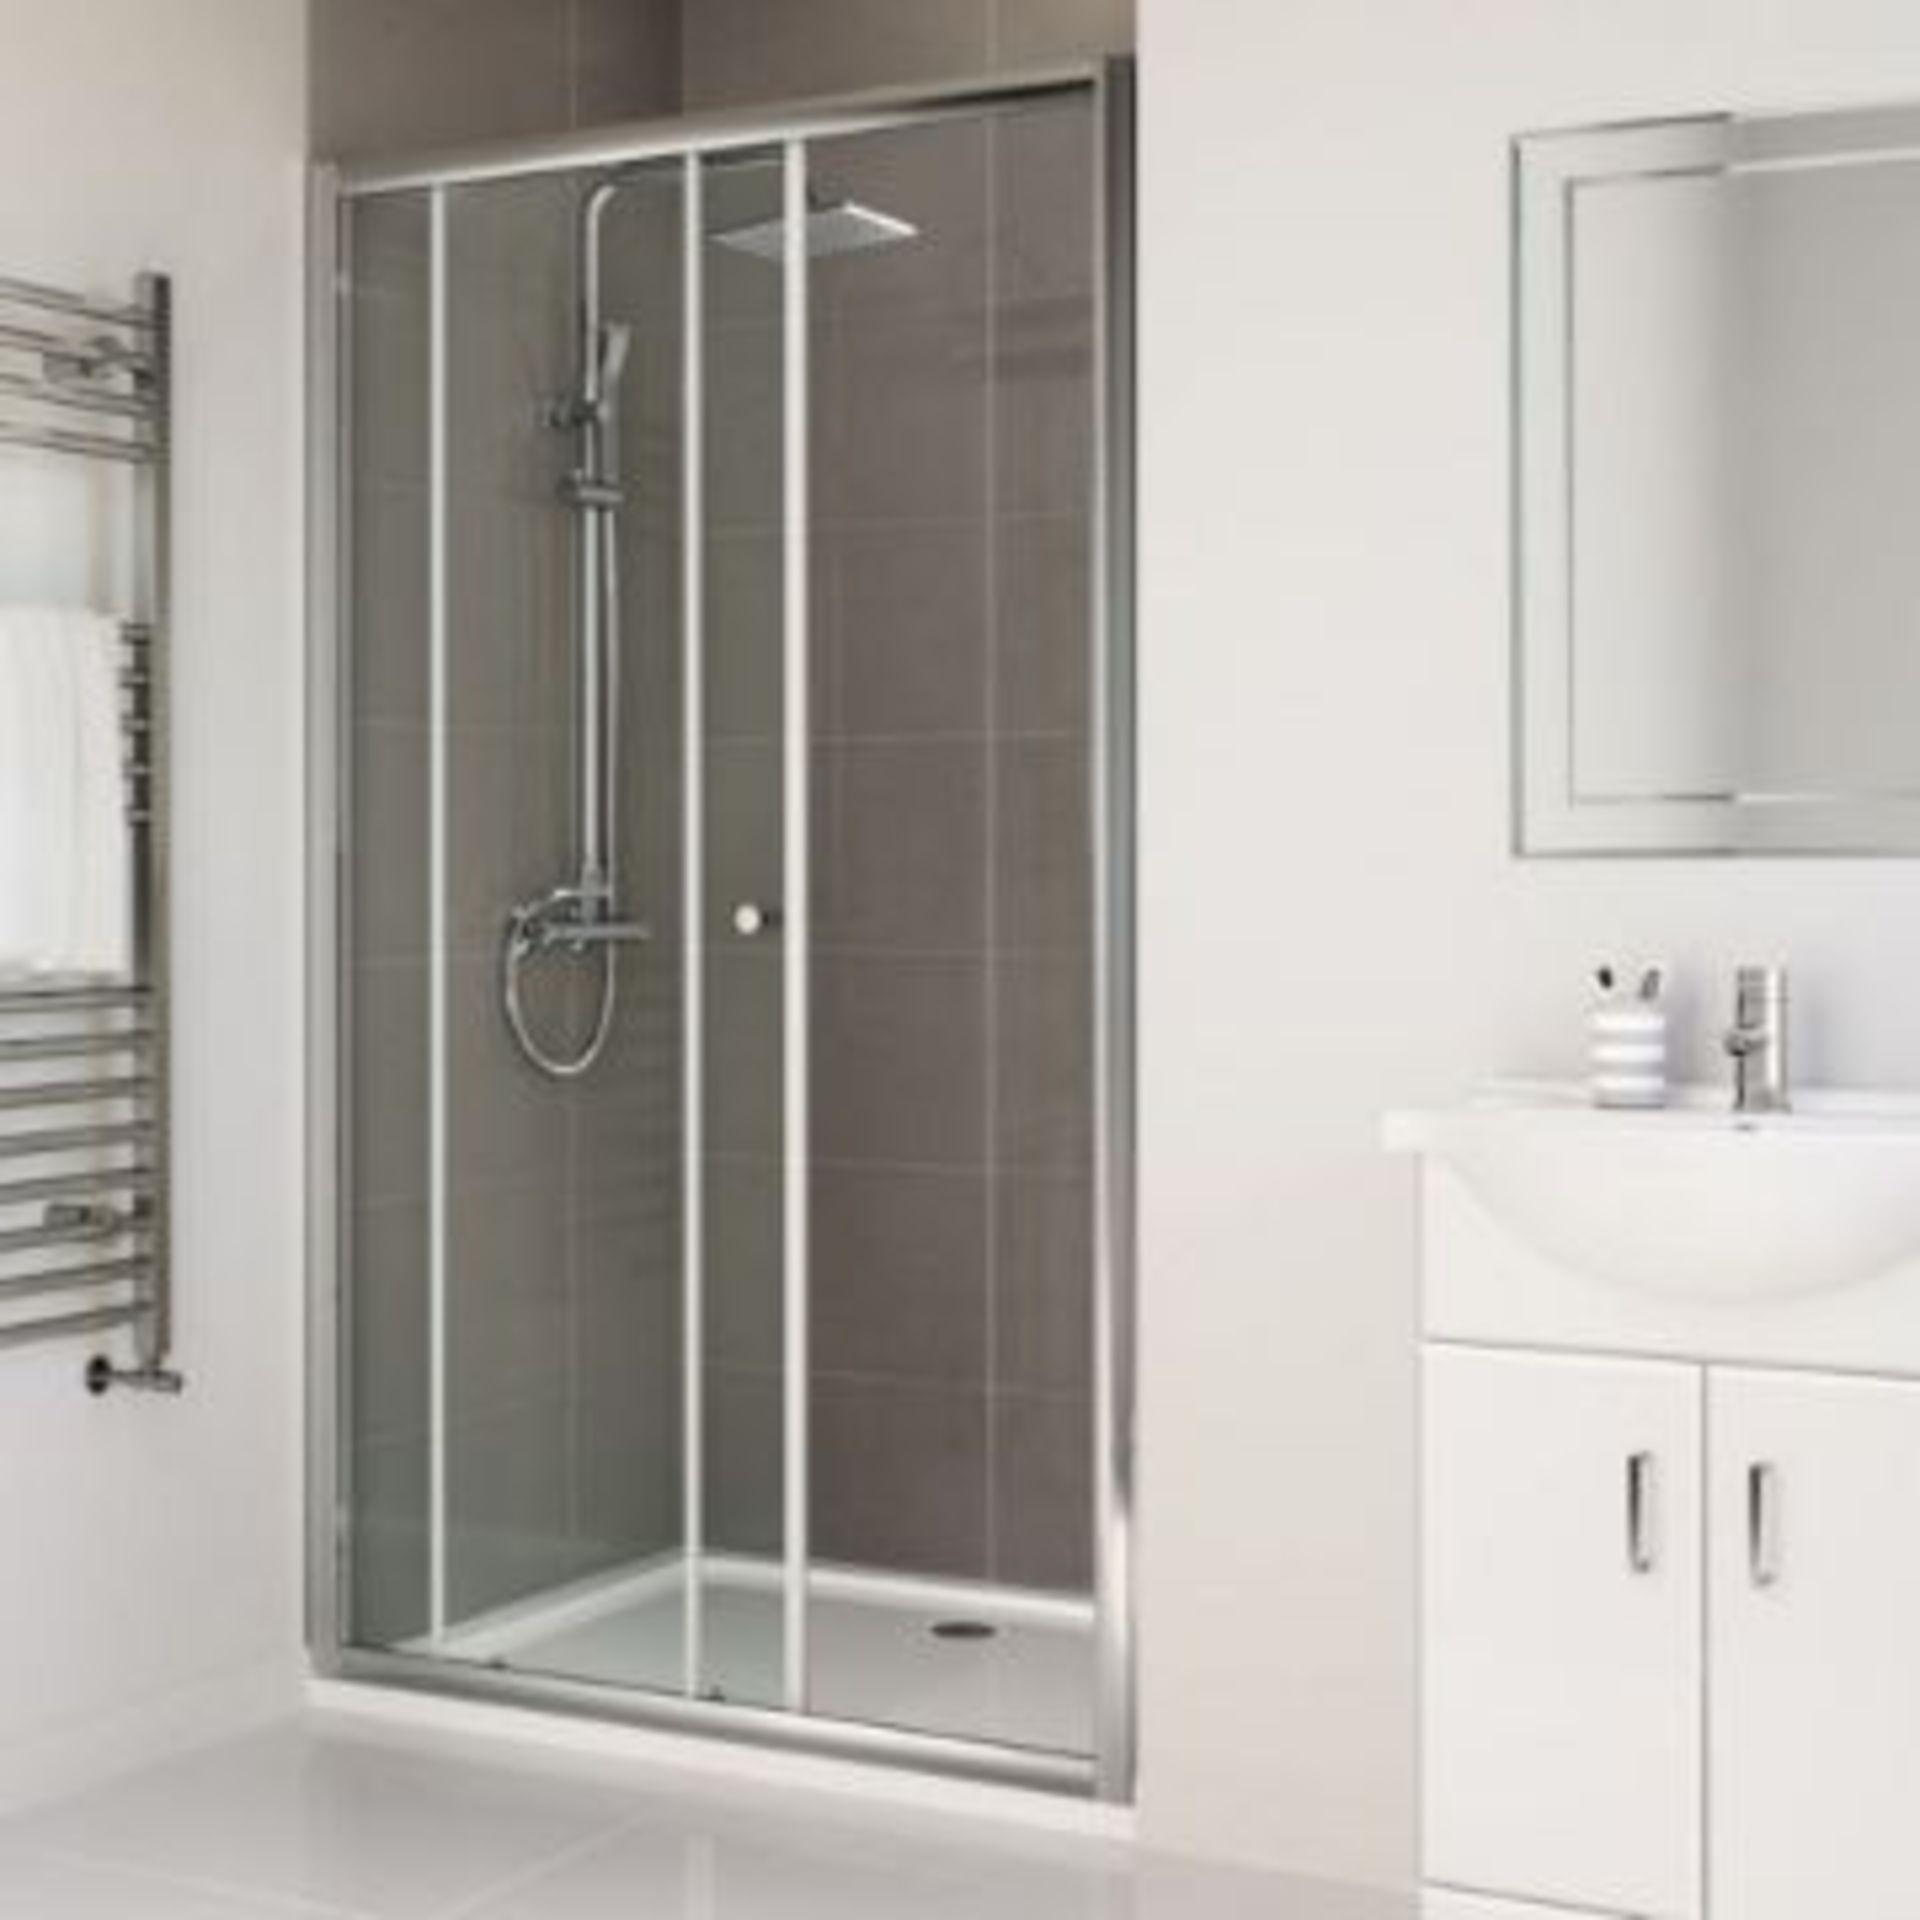 New Twyfords 1600mm - Sliding Shower Door. RRP £399.99. H80500C1+2. 6mm Safety Glass Fully W... - Image 2 of 2